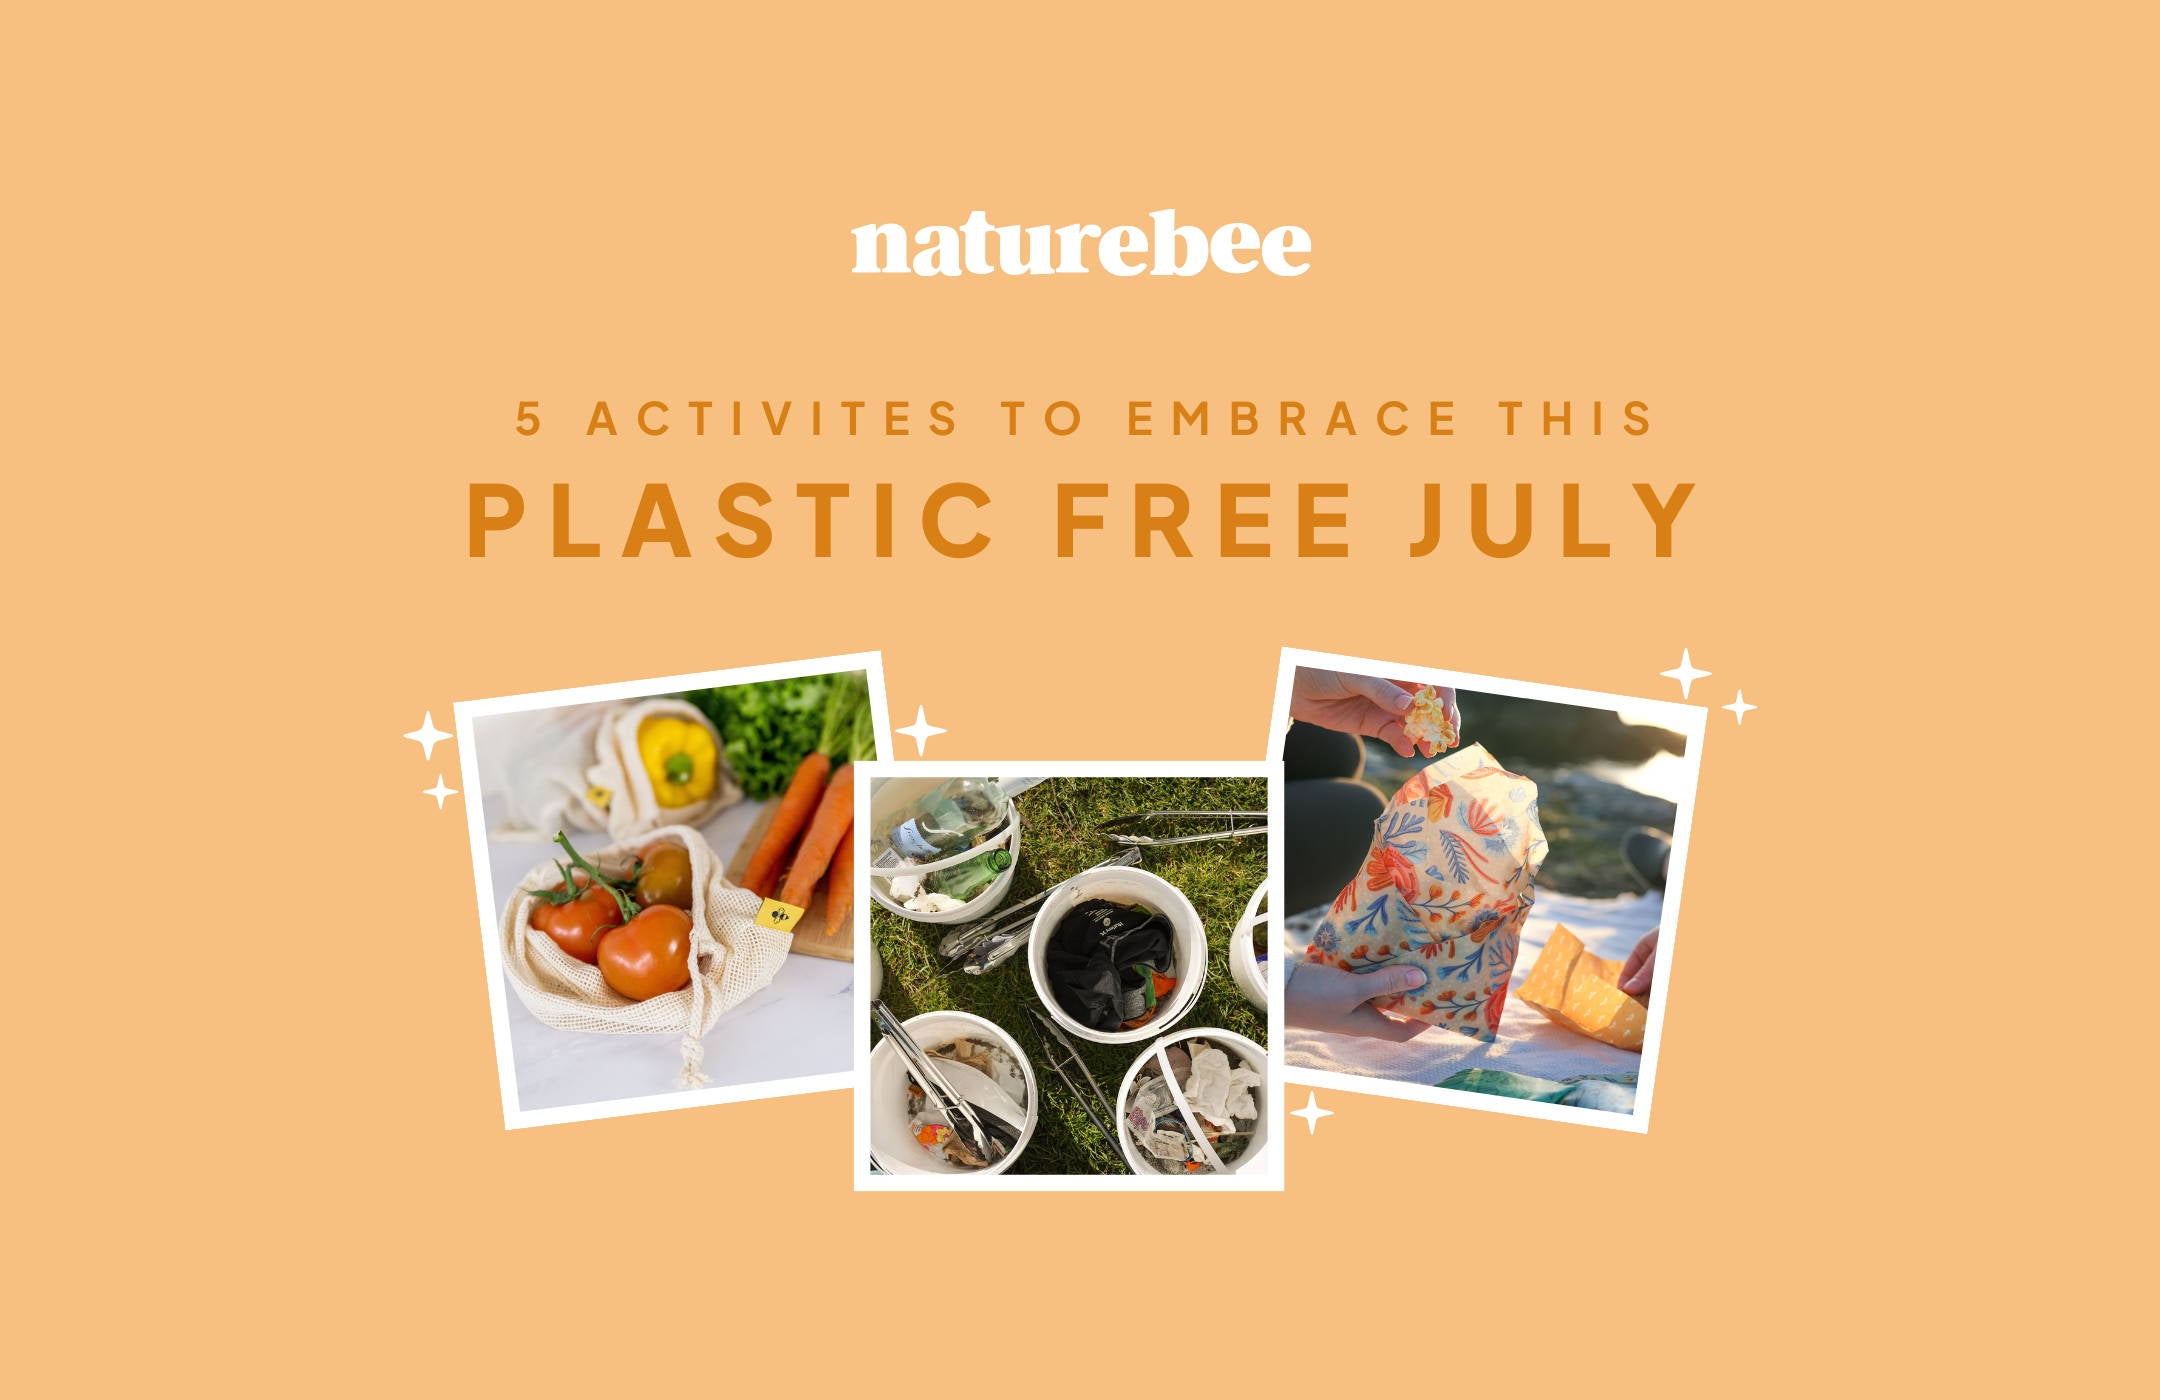 5 Engaging Activities to Embrace a Plastic Free July and make a Positive Impact!